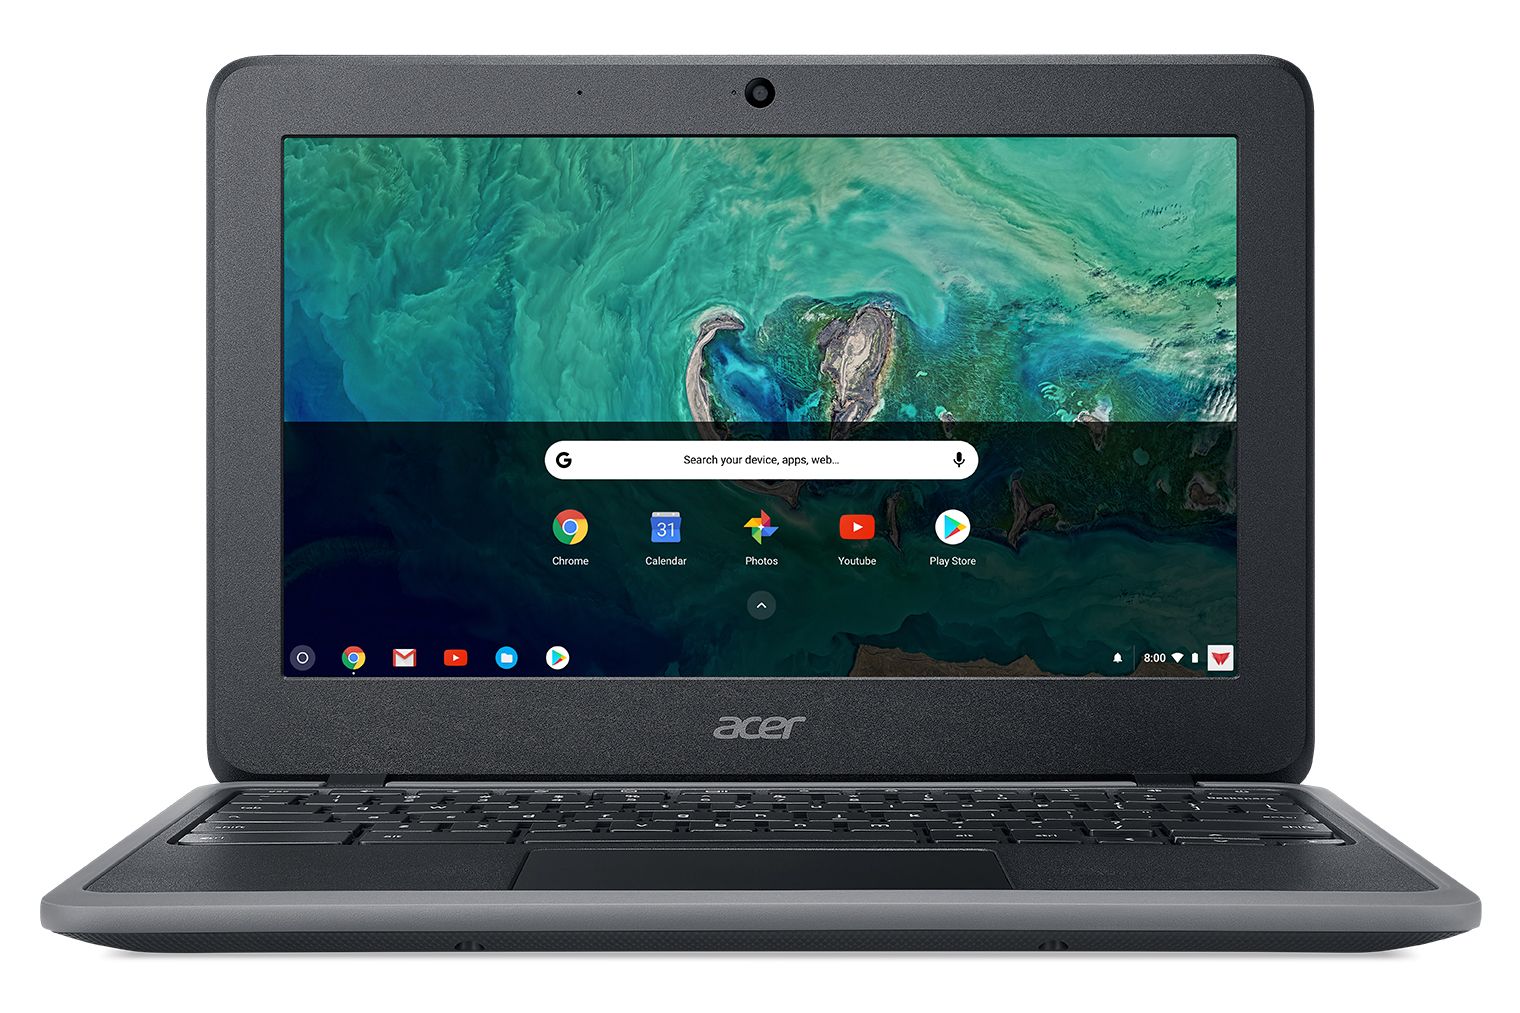 Chromebook 11 C732, Acer launches new Chromebook 11 C732 Series, 